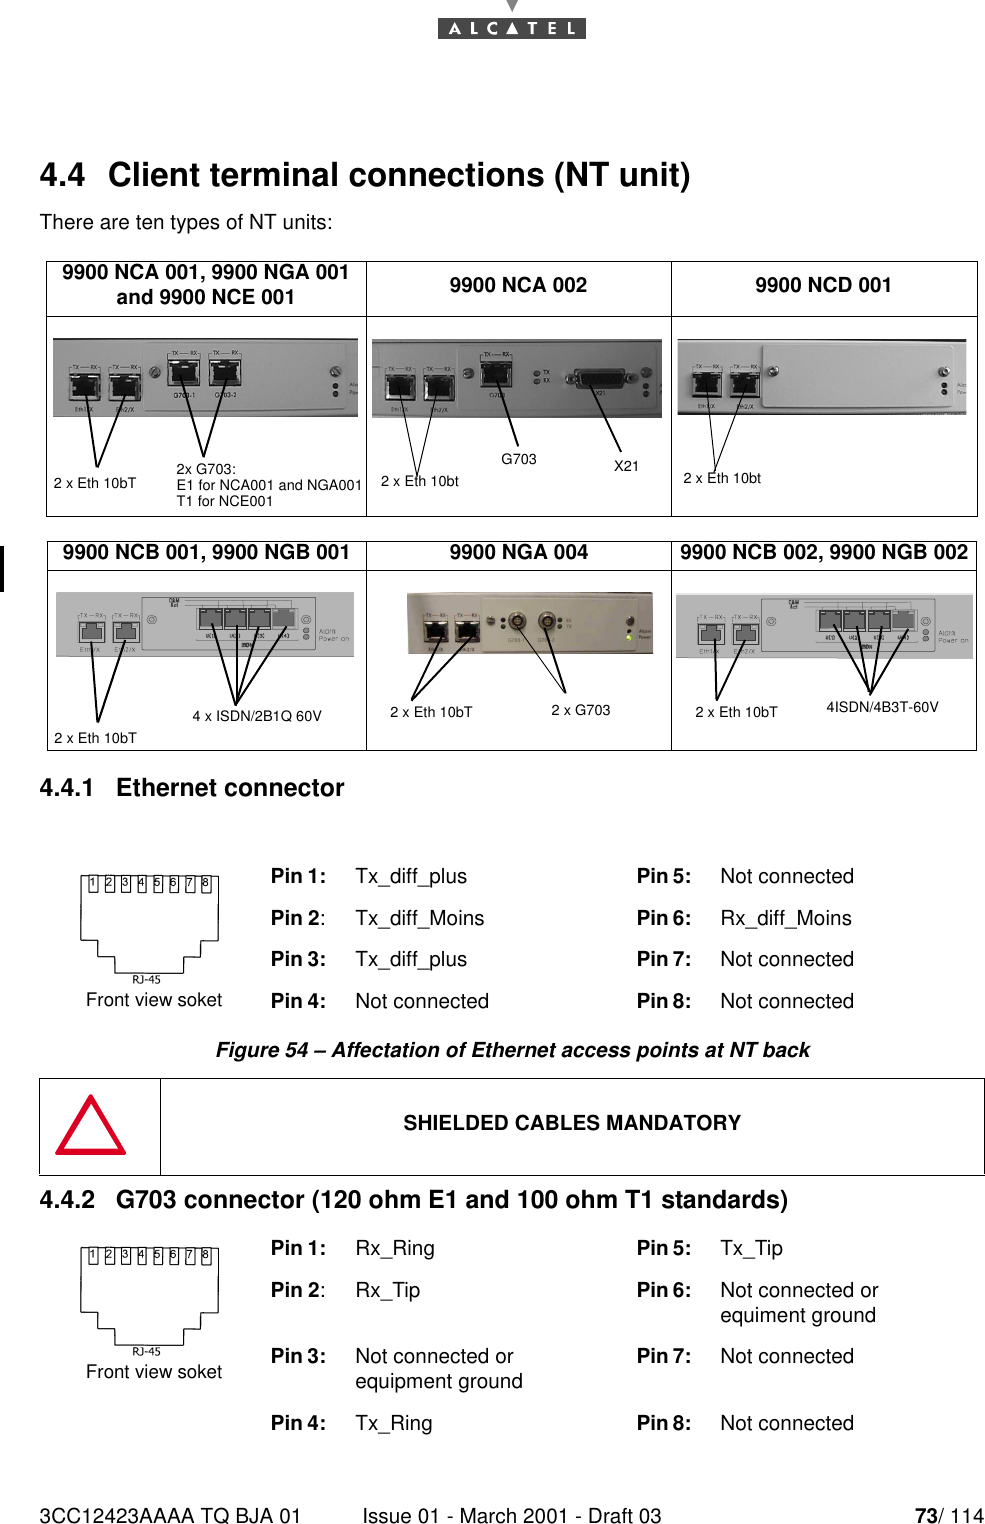 3CC12423AAAA TQ BJA 01 Issue 01 - March 2001 - Draft 03 73/ 114784.4  Client terminal connections (NT unit)There are ten types of NT units:4.4.1   Ethernet connectorFigure 54 – Affectation of Ethernet access points at NT back4.4.2   G703 connector (120 ohm E1 and 100 ohm T1 standards)9900 NCA 001, 9900 NGA 001and 9900 NCE 001 9900 NCA 002 9900 NCD 0019900 NCB 001, 9900 NGB 001 9900 NGA 004 9900 NCB 002, 9900 NGB 002Pin 1: Tx_diff_plus Pin 5: Not connectedPin 2: Tx_diff_Moins Pin 6: Rx_diff_MoinsPin 3: Tx_diff_plus Pin 7: Not connectedPin 4:  Not connected Pin 8: Not connectedSHIELDED CABLES MANDATORYPin 1: Rx_Ring Pin 5: Tx_TipPin 2: Rx_Tip Pin 6:  Not connected or equiment groundPin 3:  Not connected or equipment ground Pin 7: Not connectedPin 4:  Tx_Ring Pin 8: Not connected 2 x Eth 10bT 2x G703:E1 for NCA001 and NGA001T1 for NCE001G703 X212 x Eth 10bt 2 x Eth 10bt2 x Eth 10bT4 x ISDN/2B1Q 60V 2 x G7032 x Eth 10bT 4ISDN/4B3T-60V2 x Eth 10bTFront view soketFront view soket